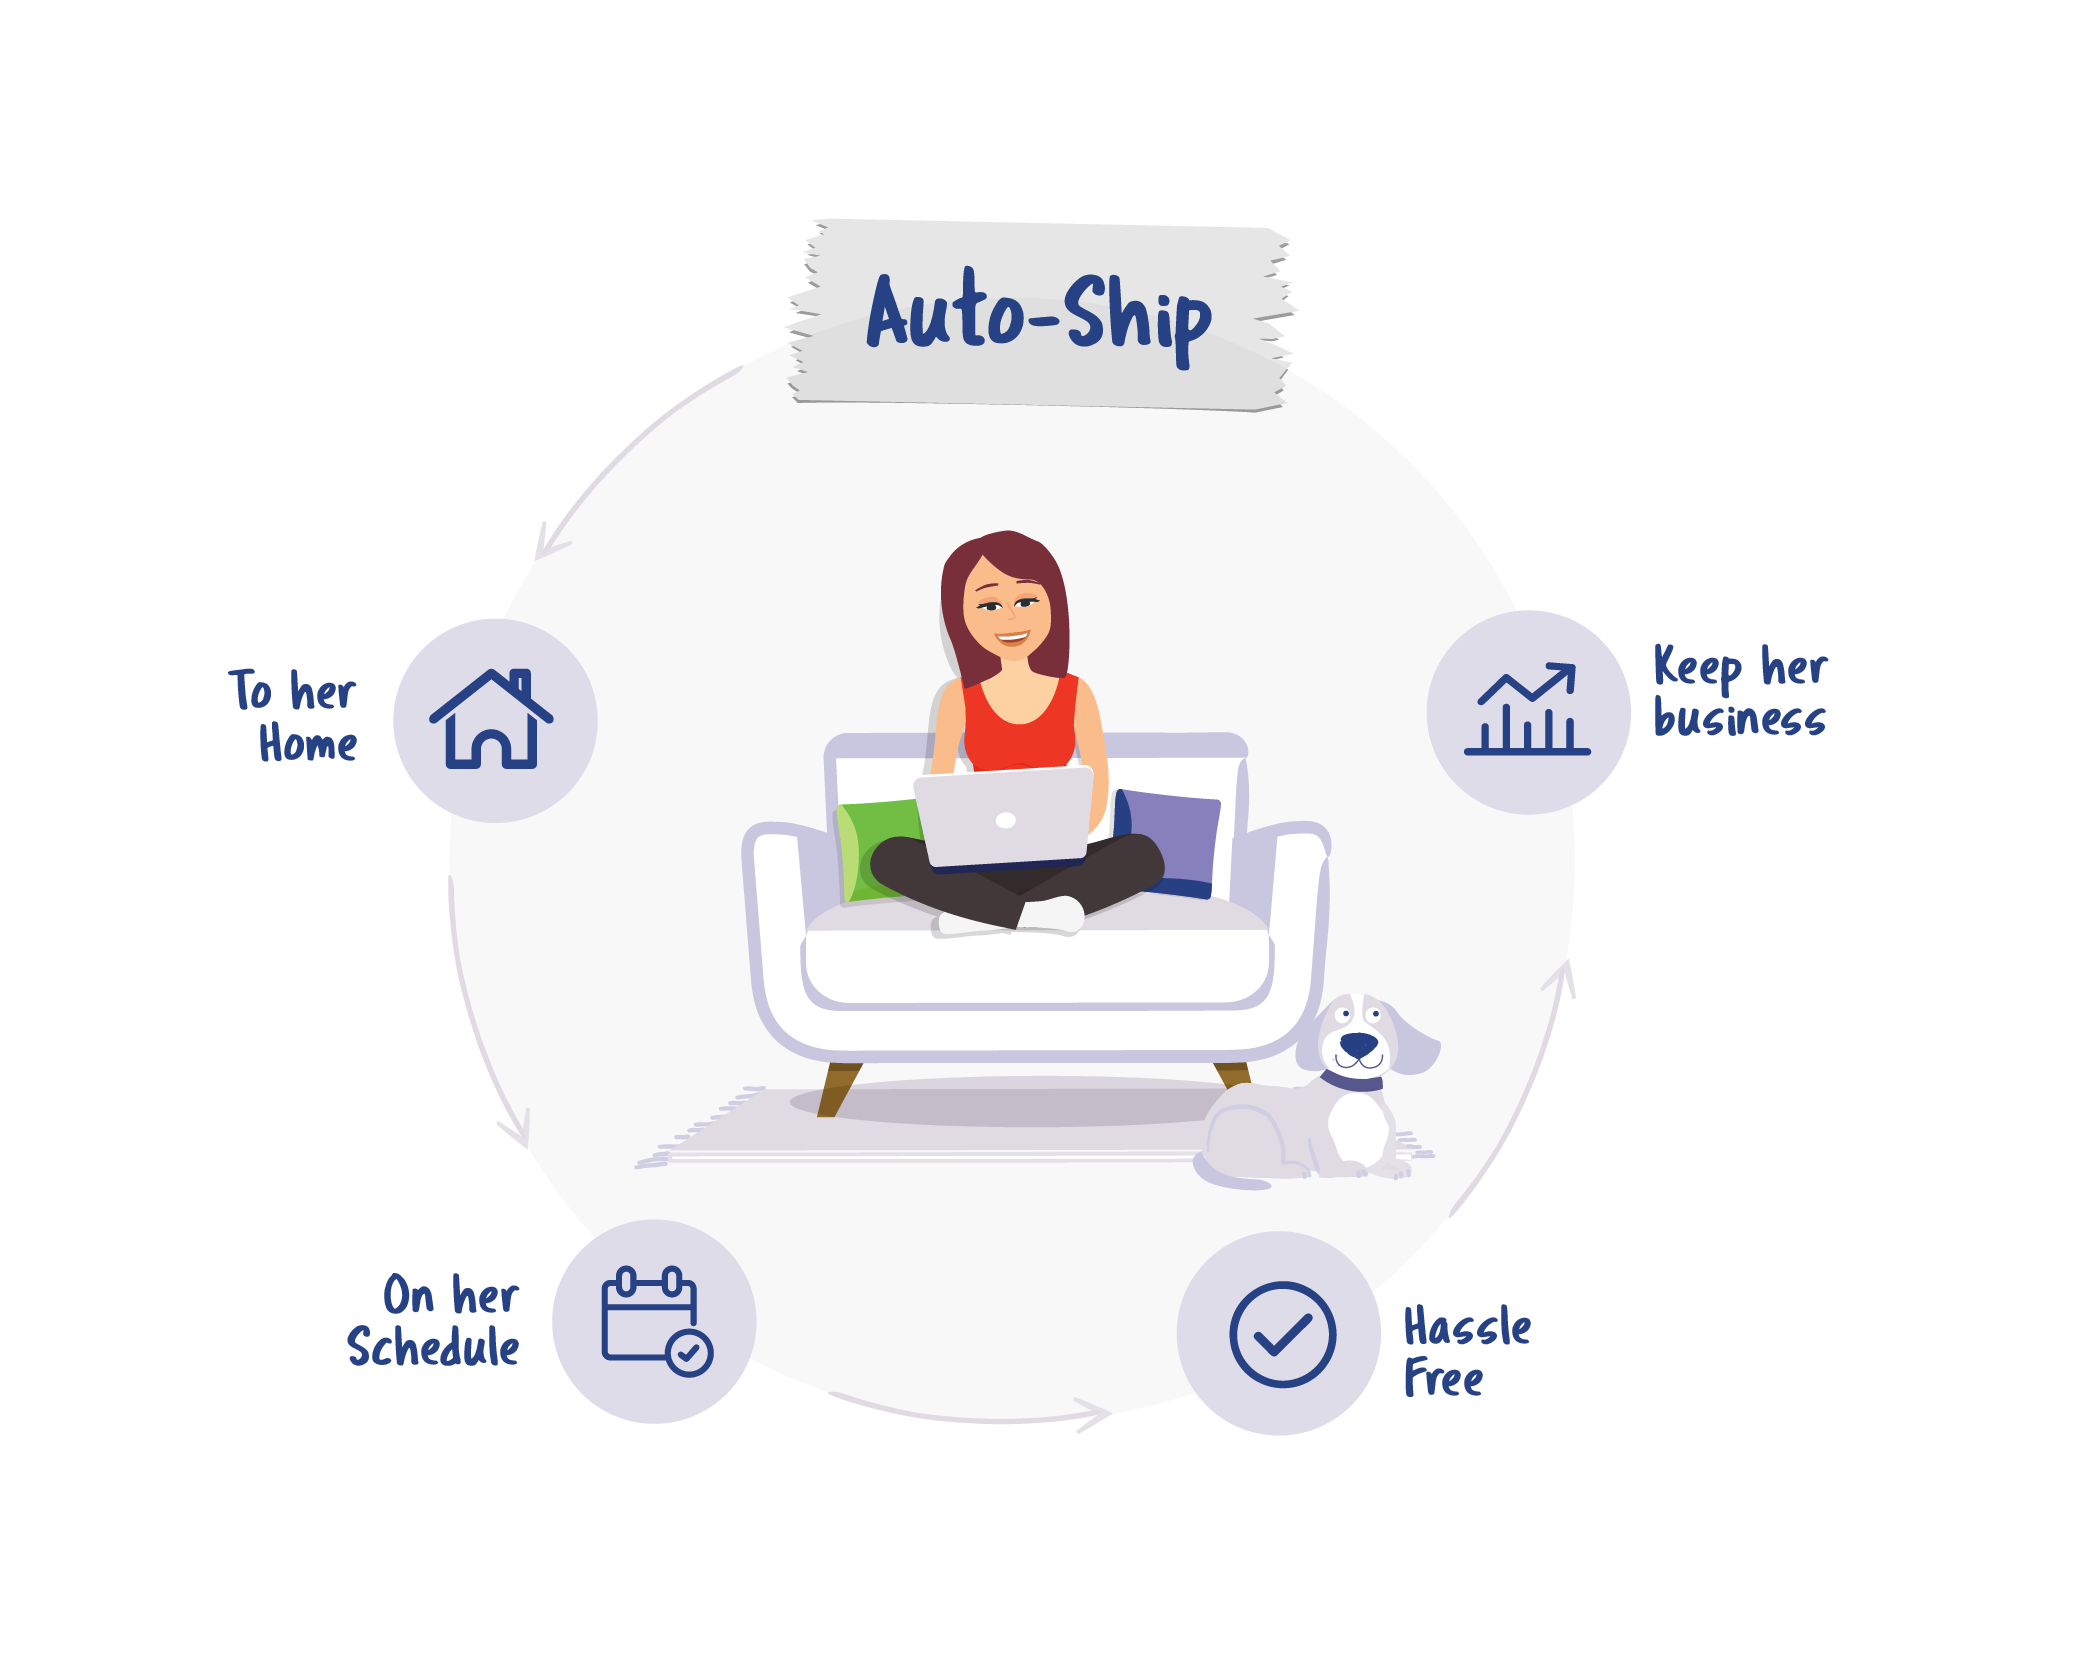 Auto-Ship is great for you and your customers